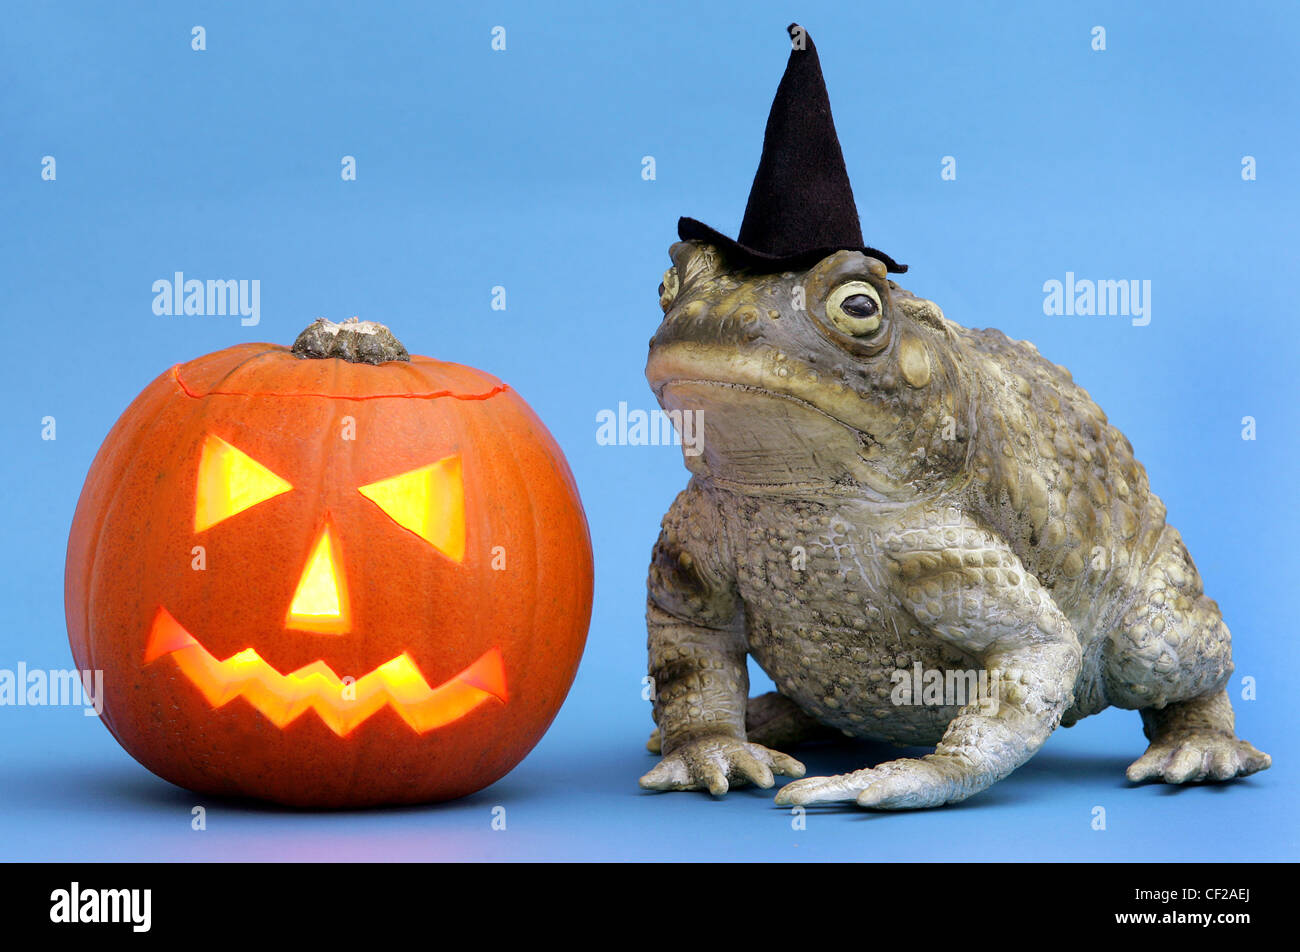 A carved Halloween pumpkin and a toad wearing a witches hat Stock Photo